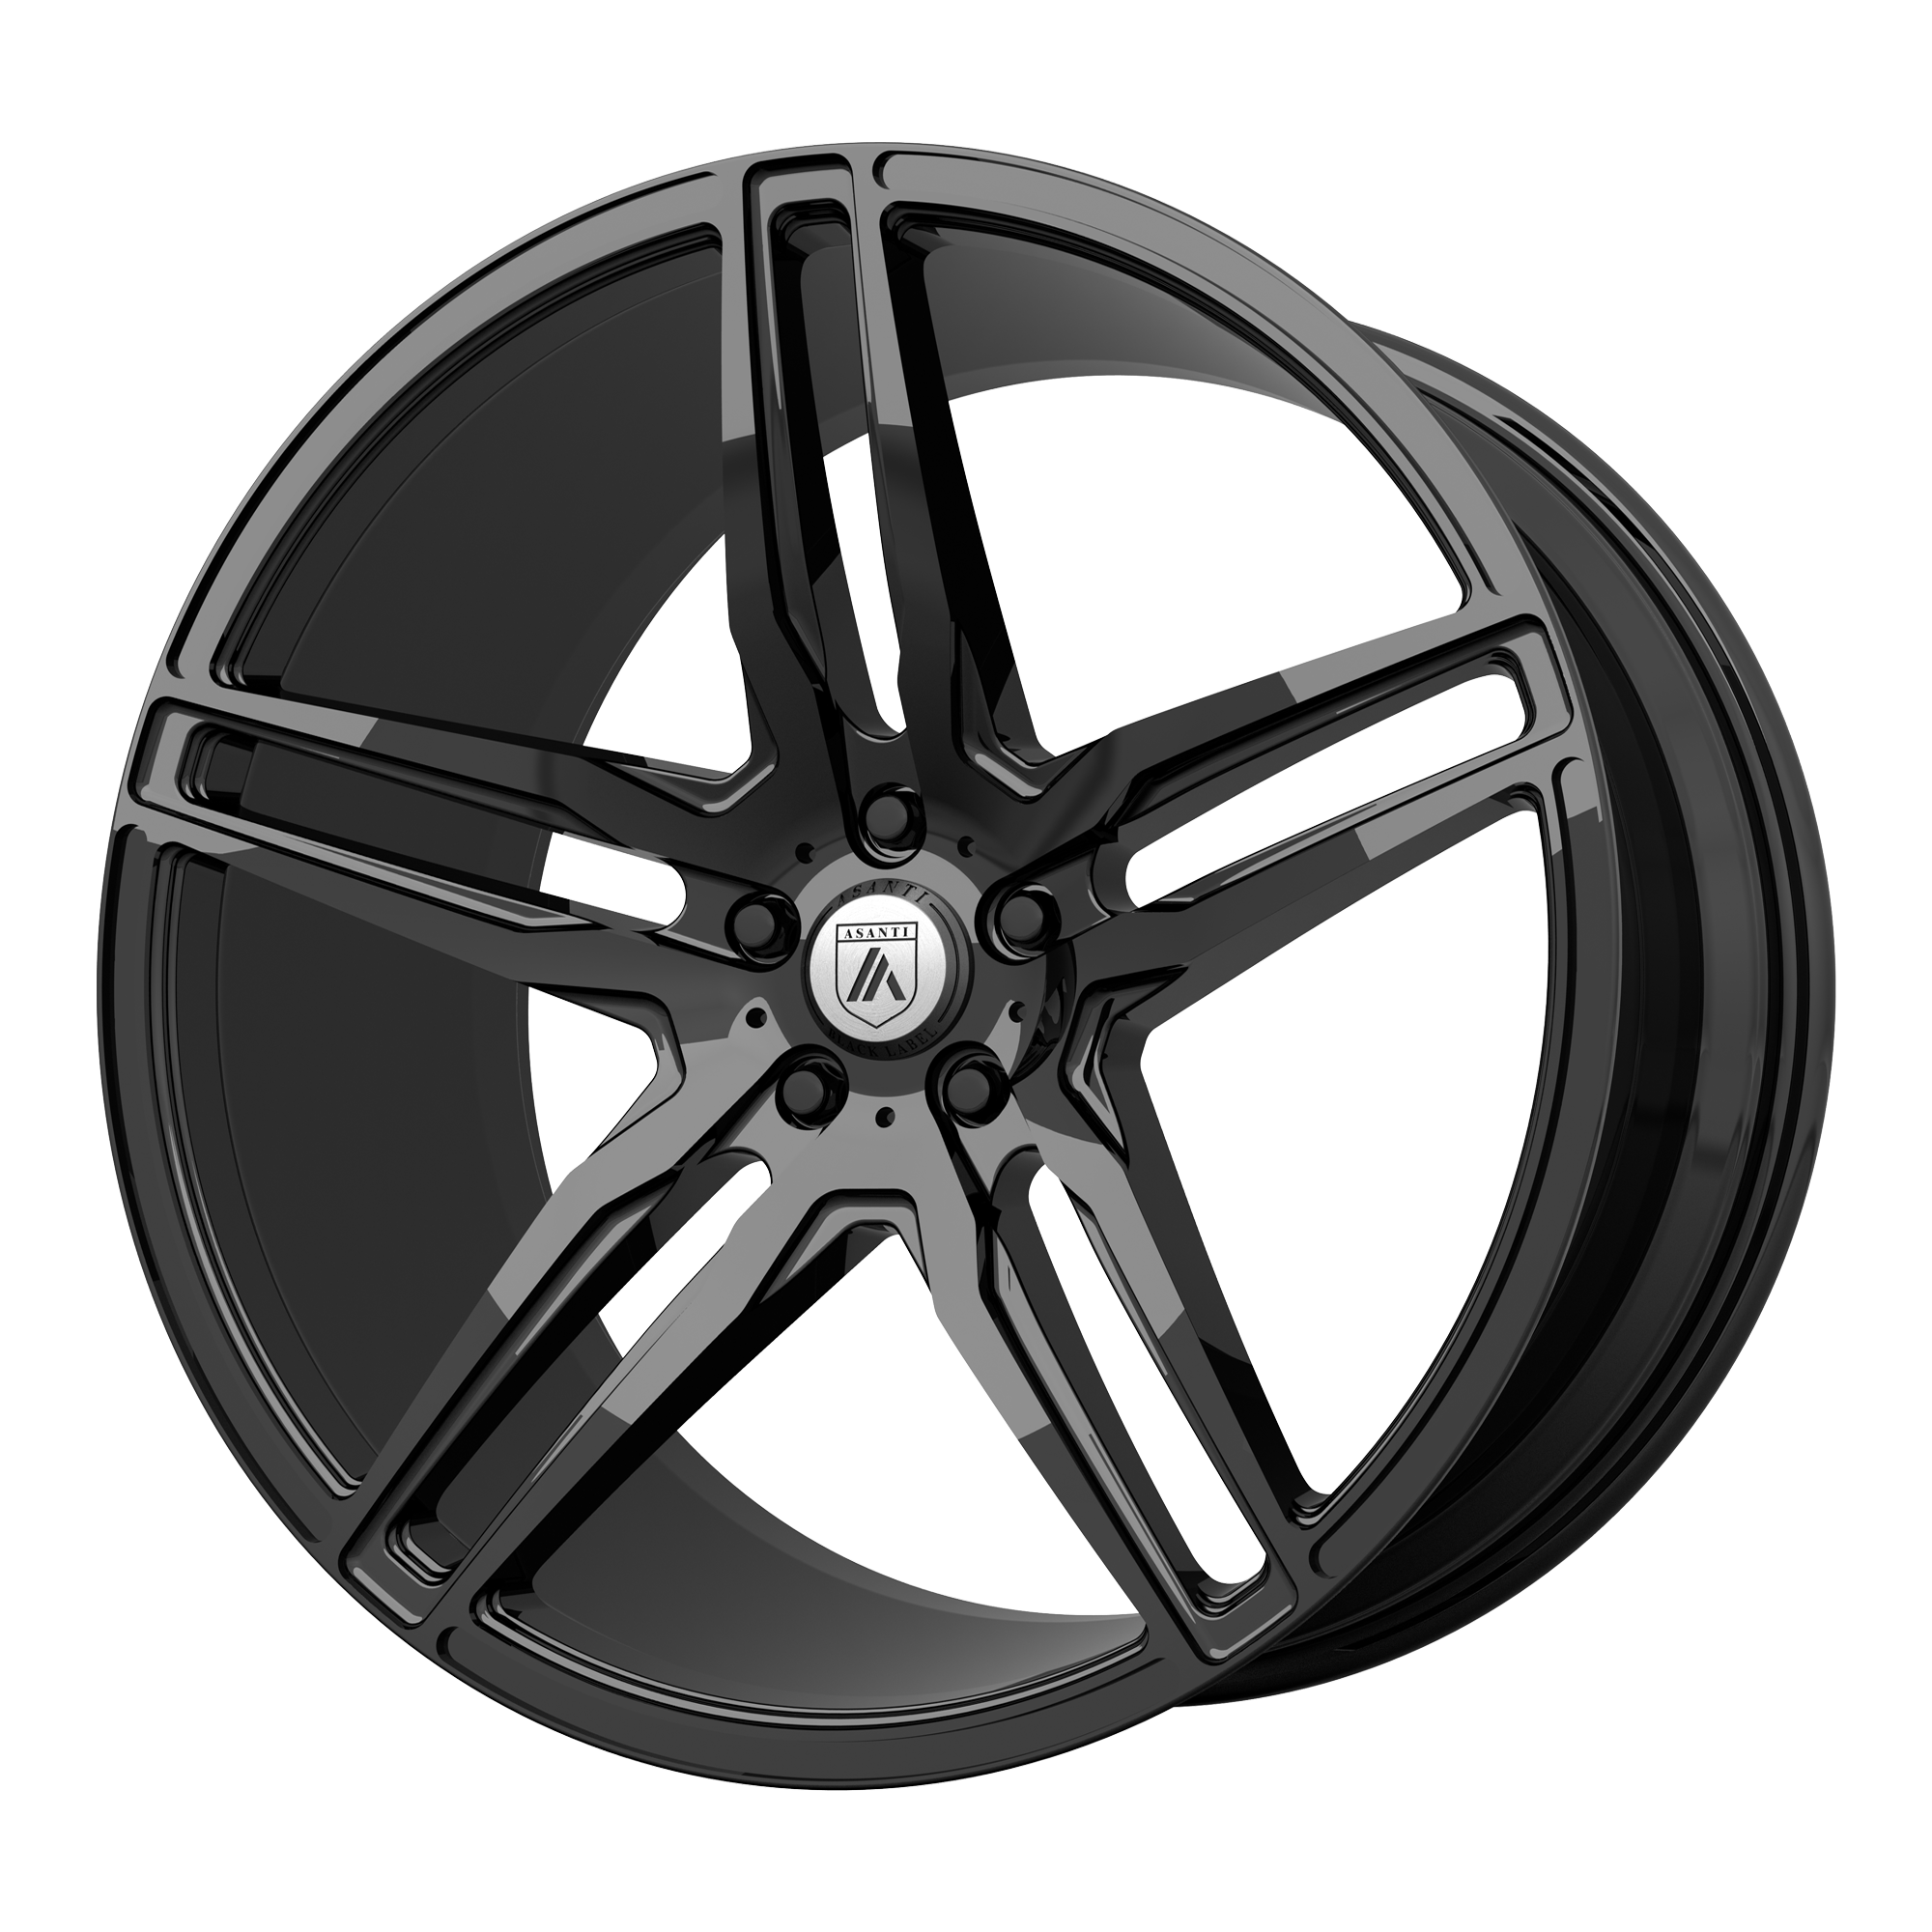 ORION 19x8.5 5x112.00 GLOSS BLACK (38 mm) - Tires and Engine Performance